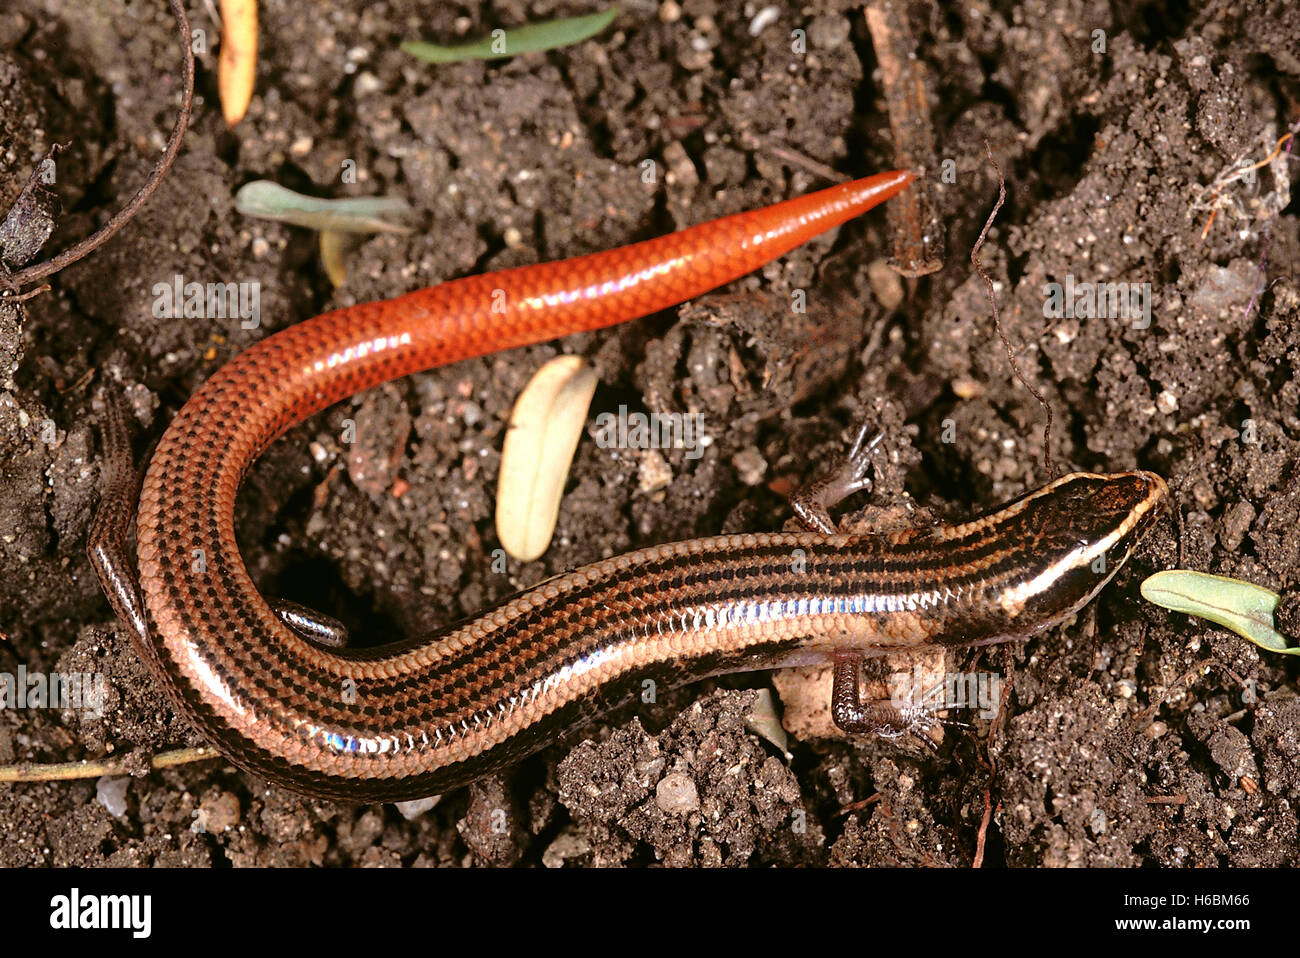 A skink resembling Riopa. The body of this species is shorter and the tail is brightly coloured. Stock Photo